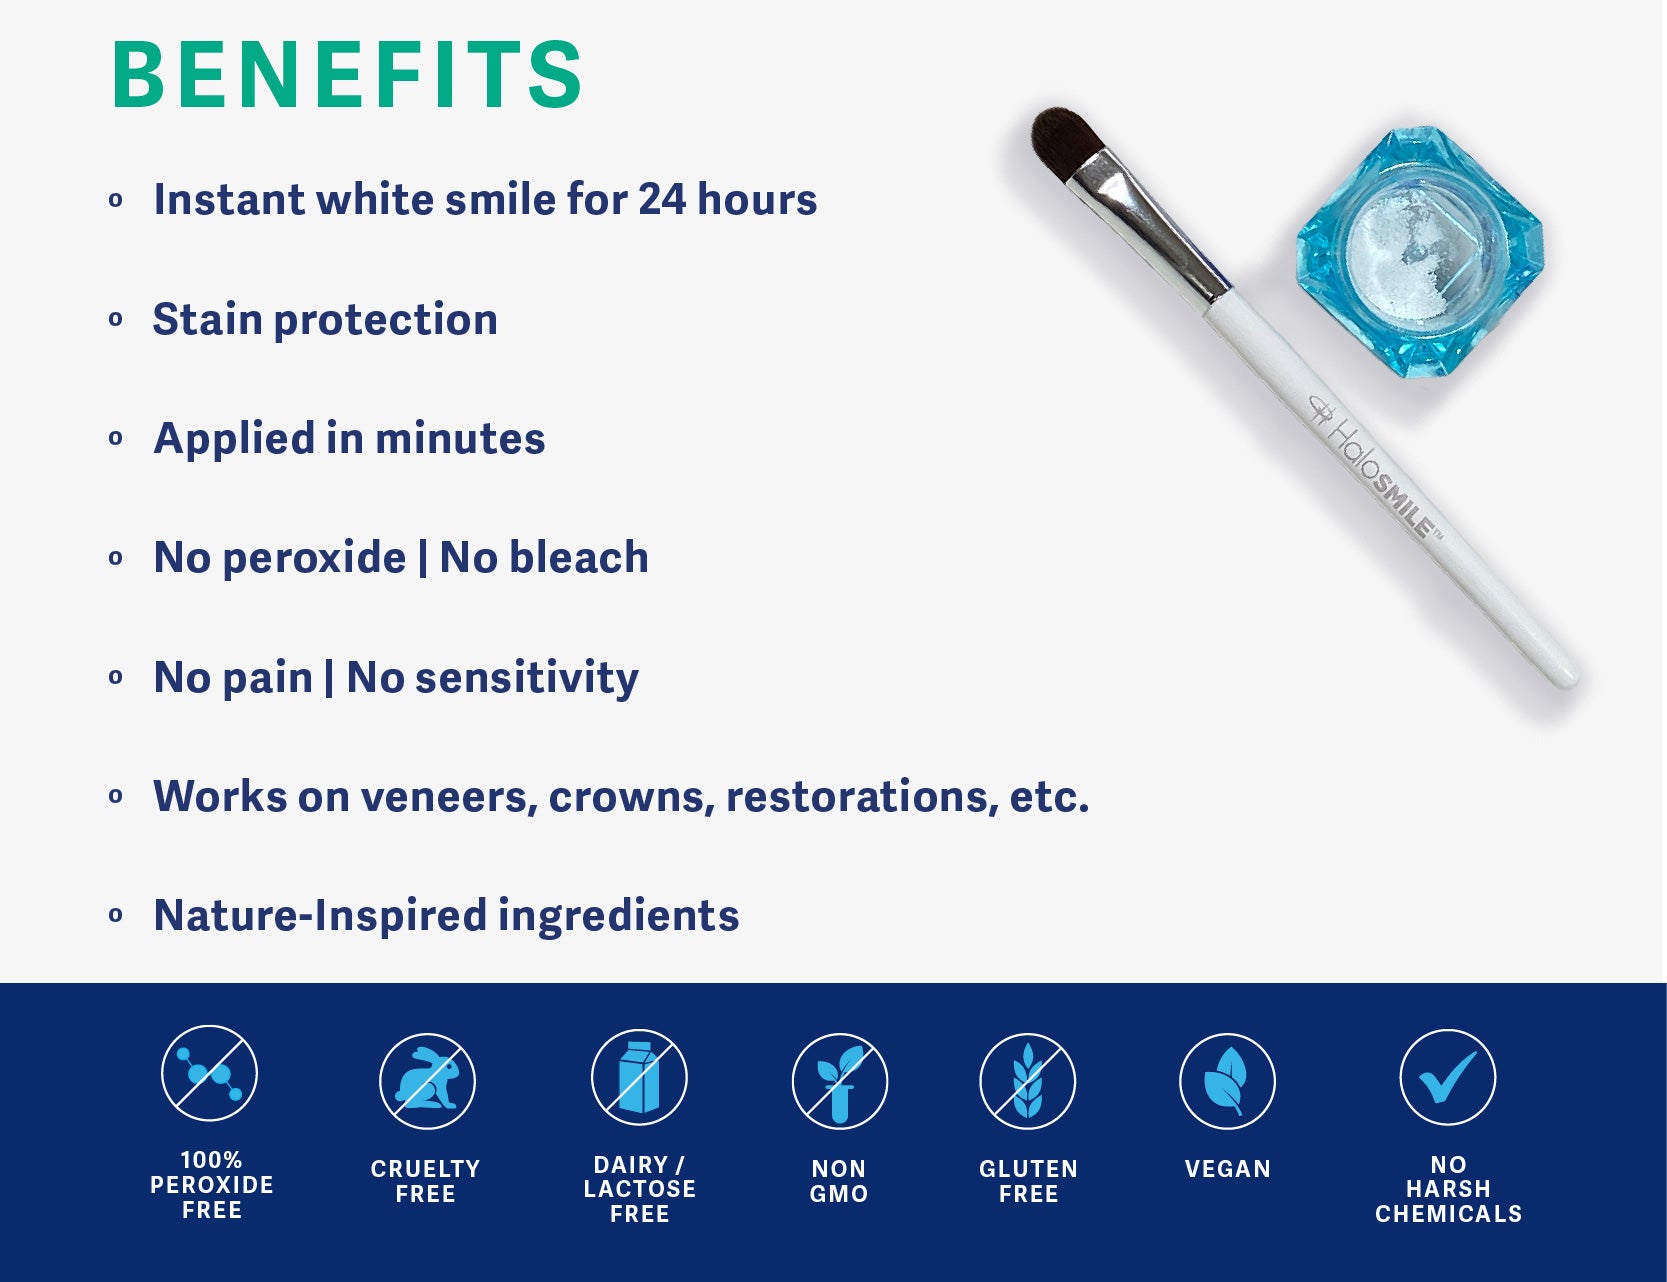 Benefits of Halo Smile paint on teeth whitening. Stain protection. No peroxide. No sensitivity